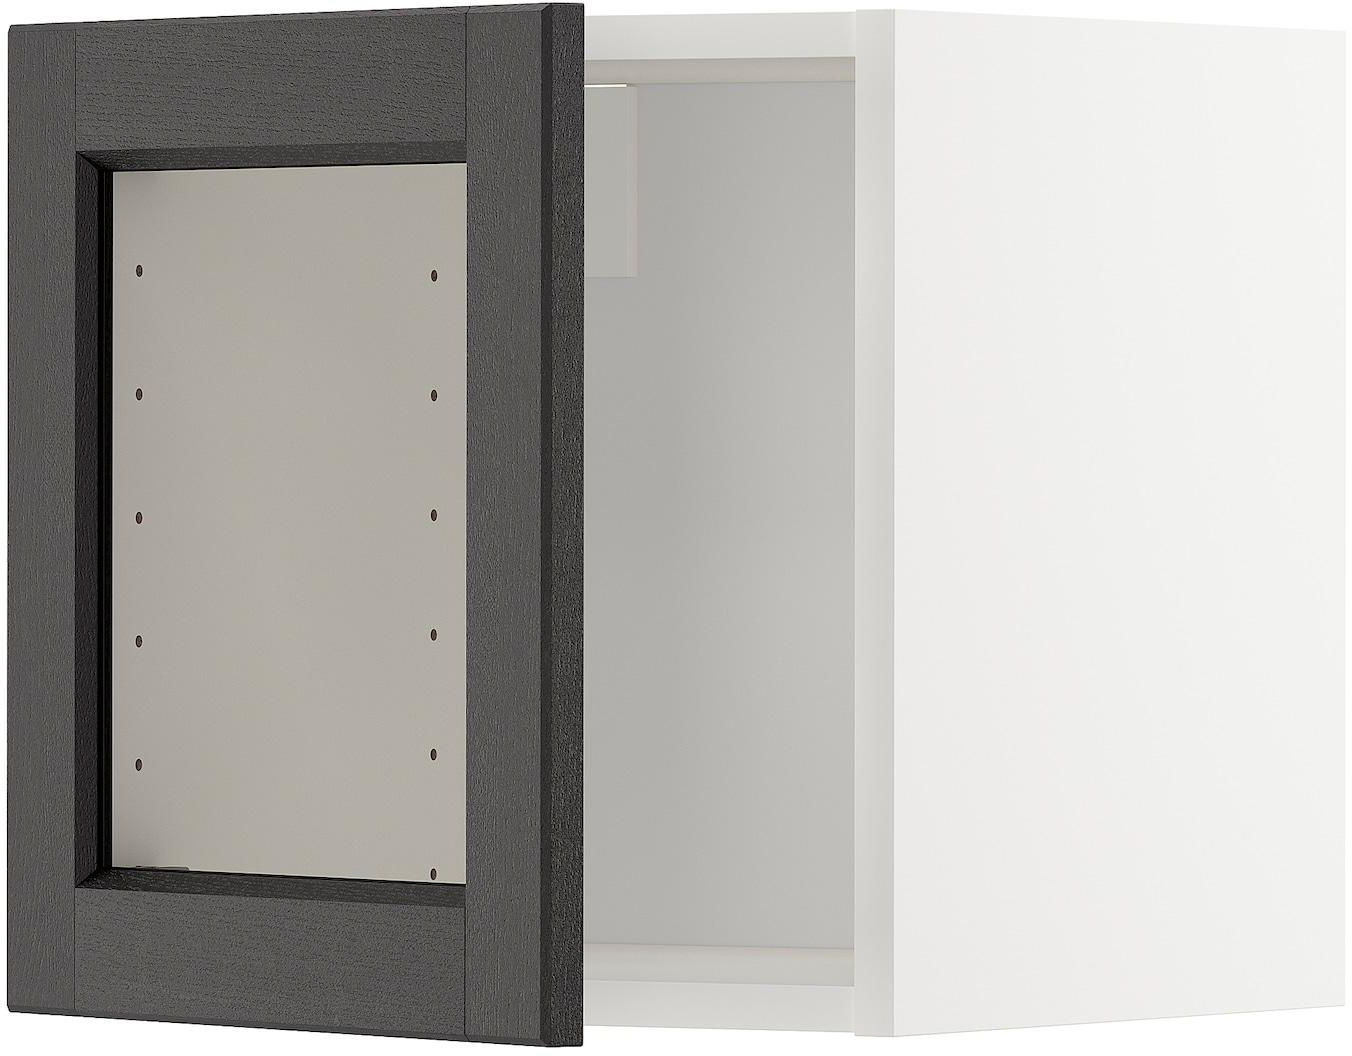 METOD Wall cabinet with glass door - white/Lerhyttan black stained 40x40 cm